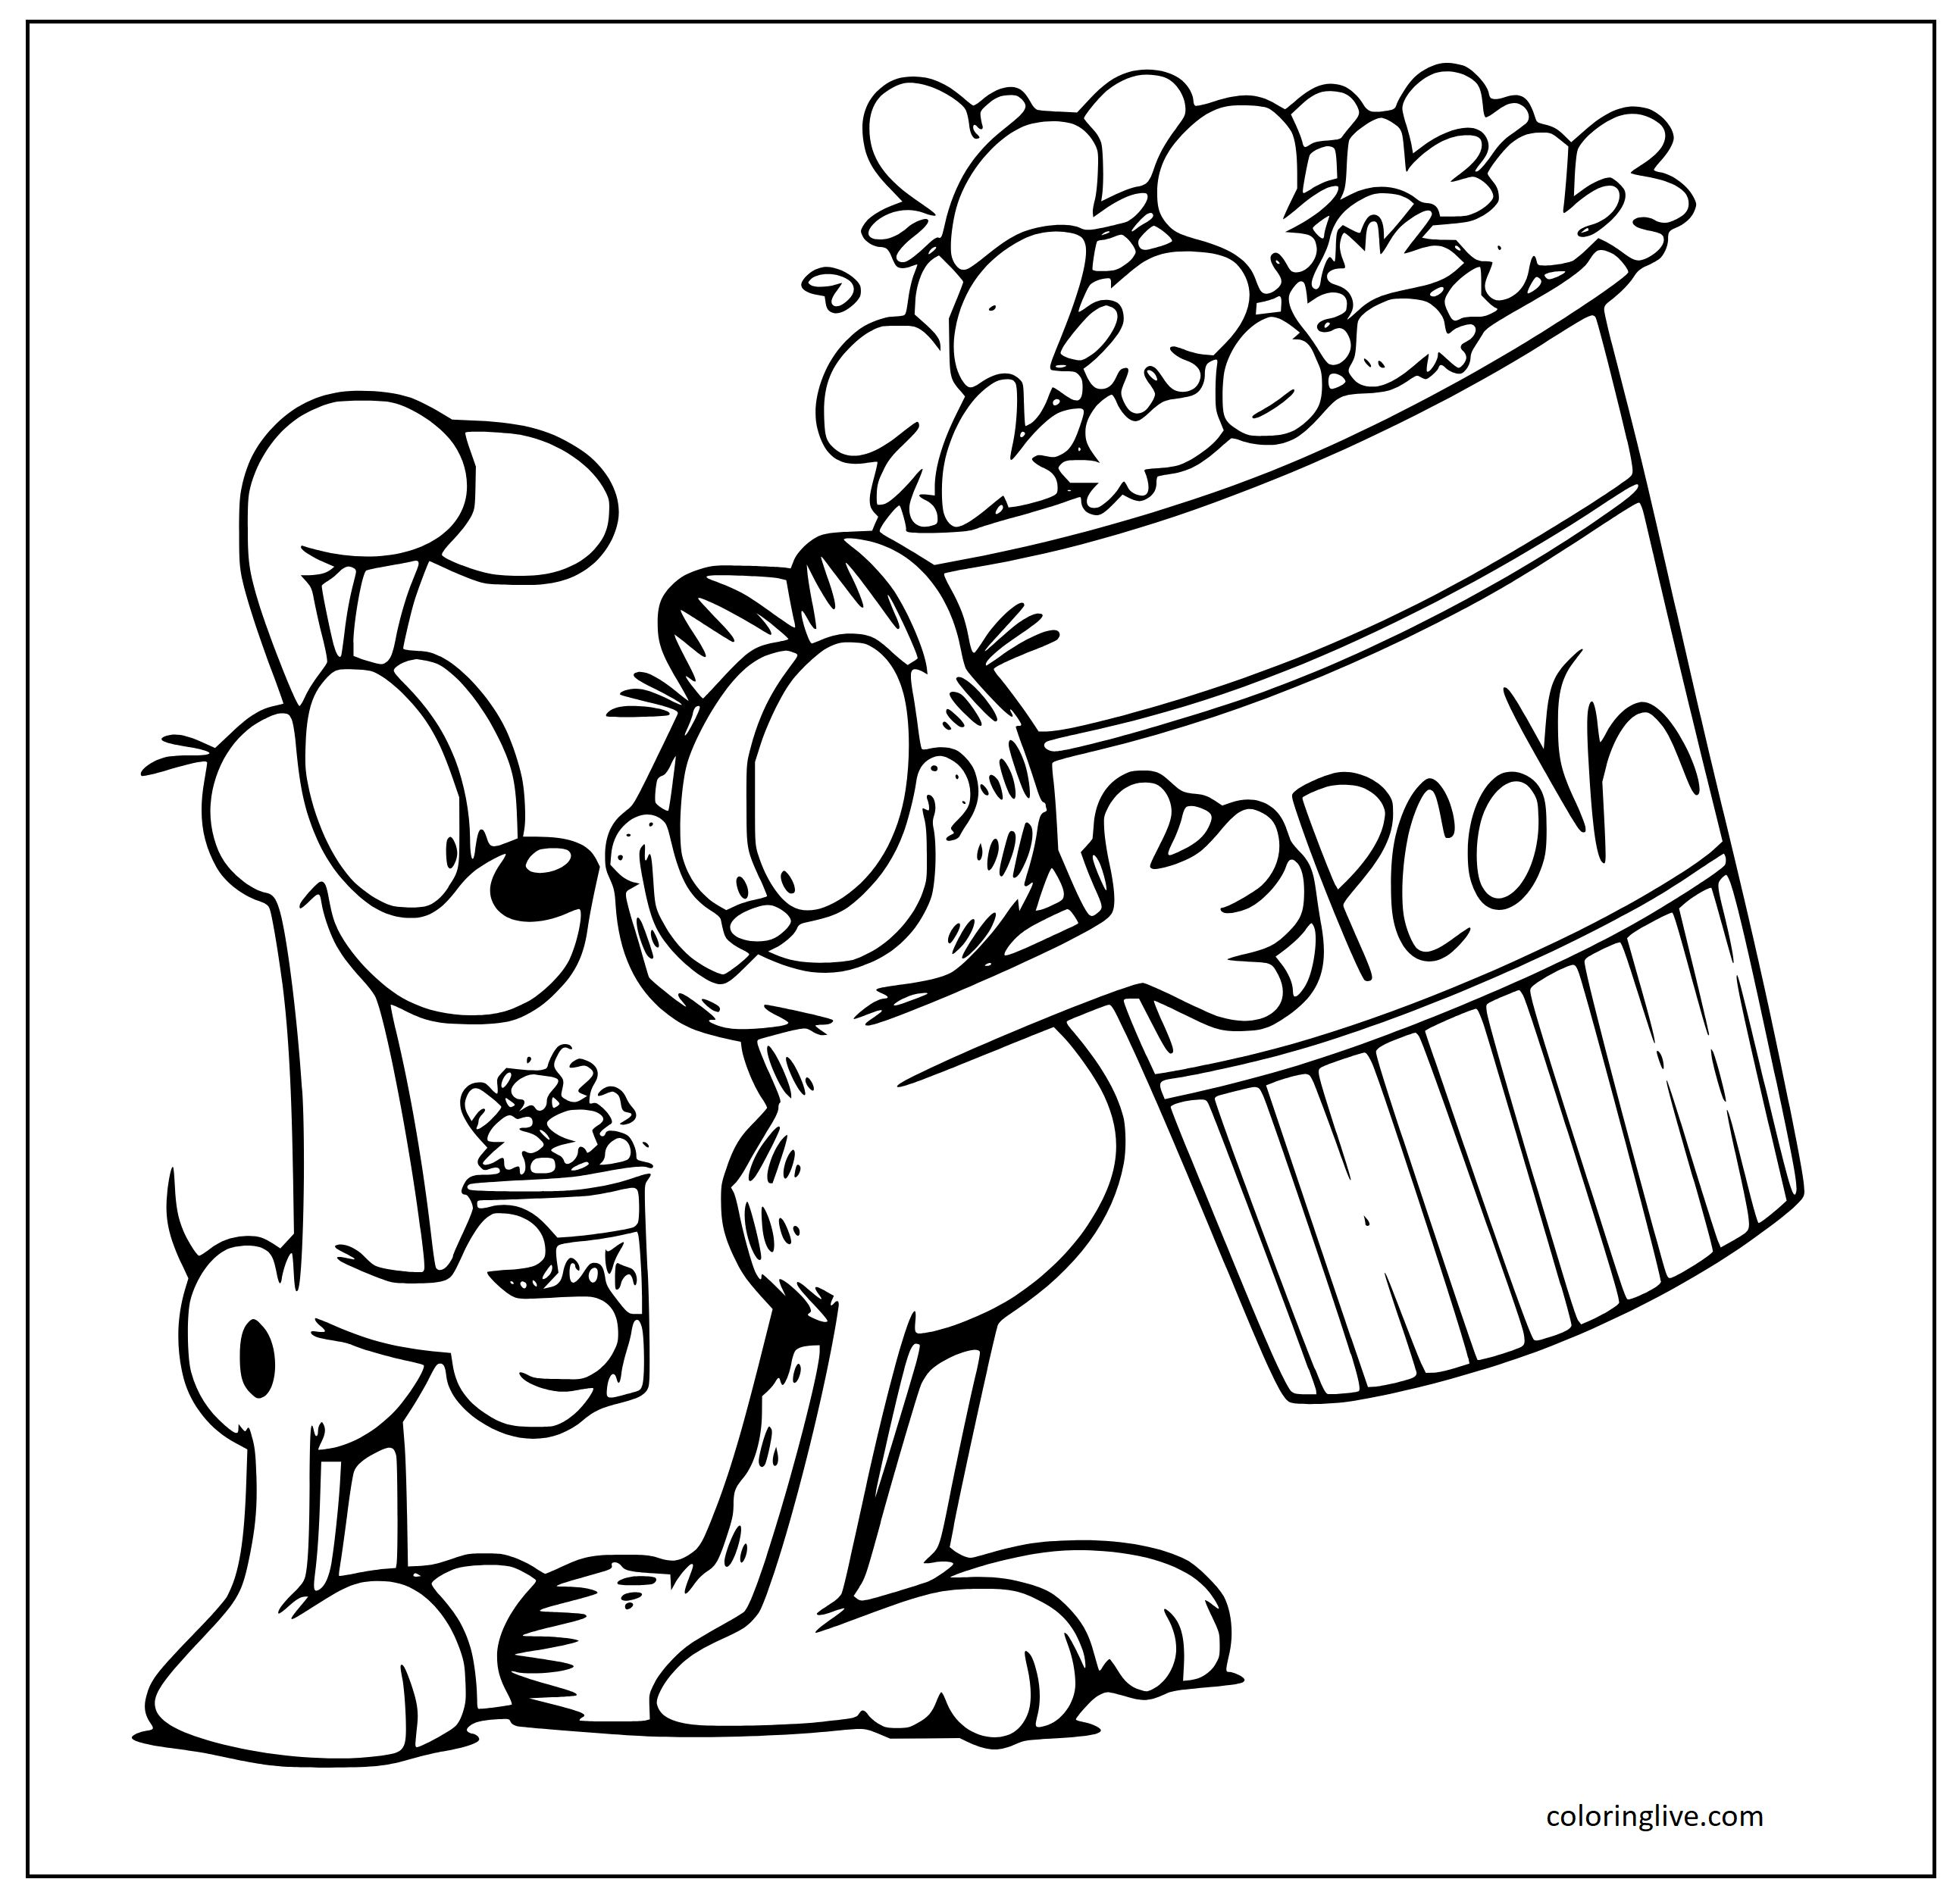 Printable Odie eating popcorn with garfield Coloring Page for kids.